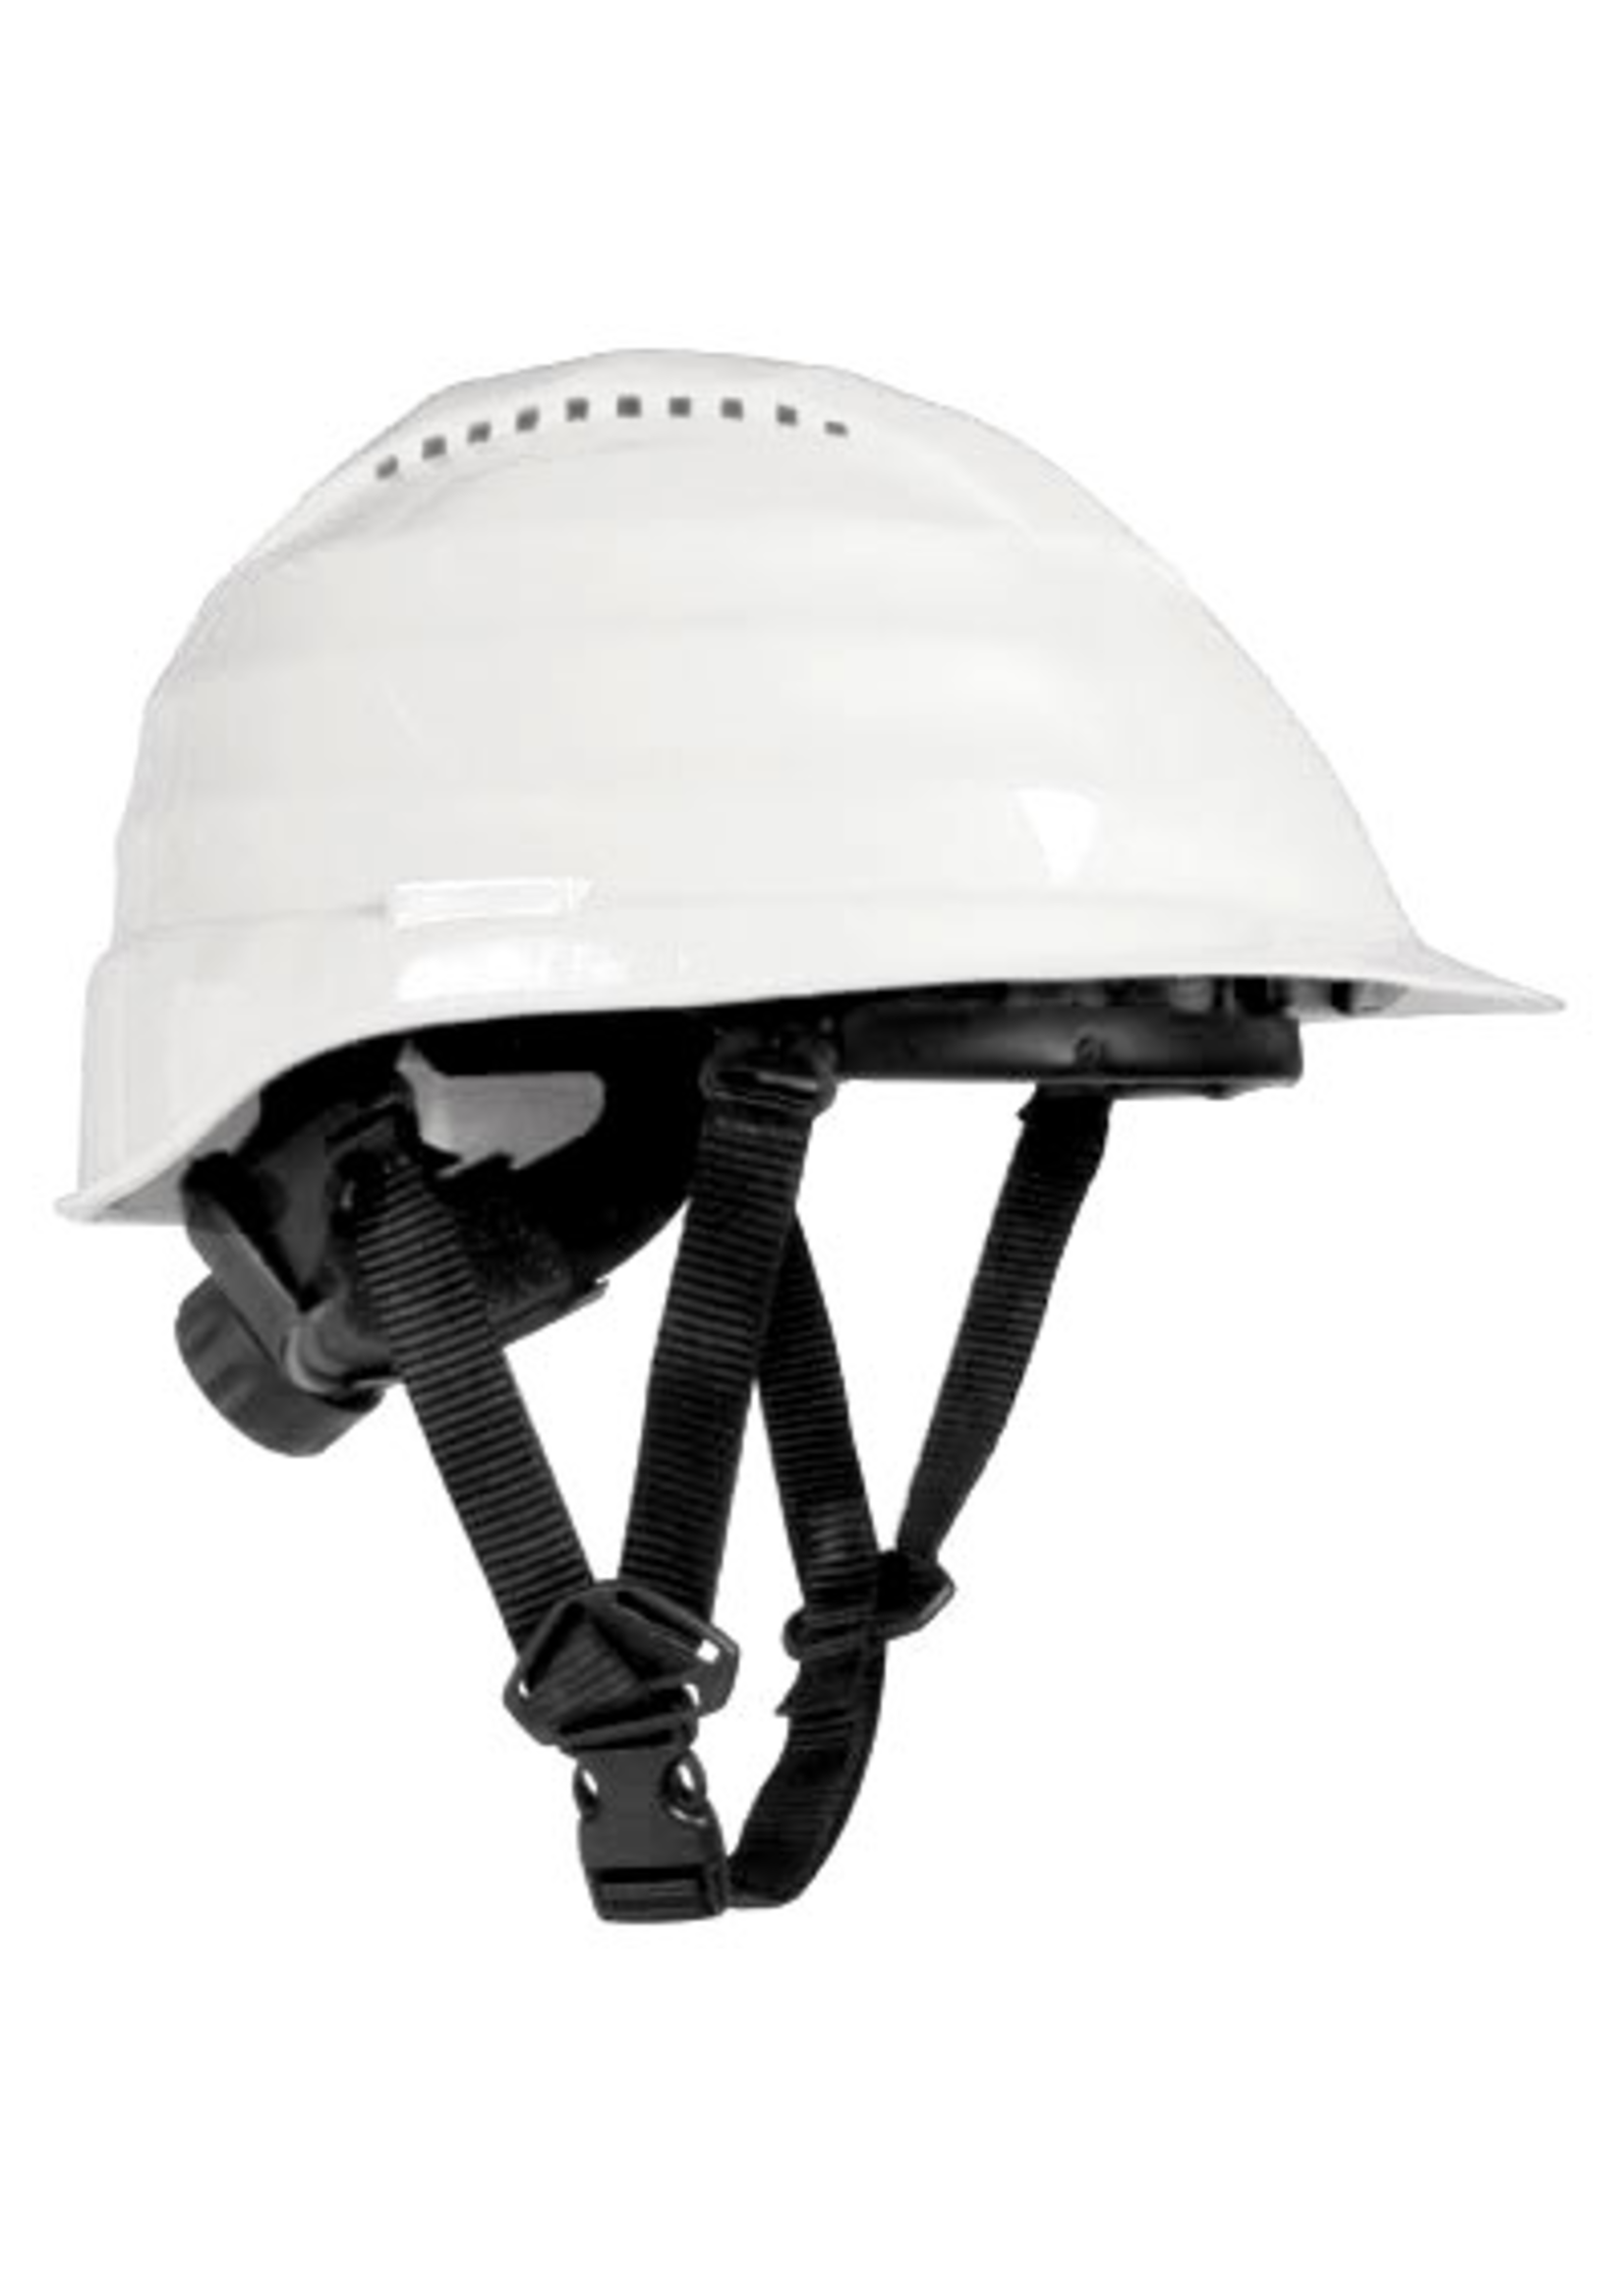 Rockman Rockman Forestry Arborist Vented Helmet, White with 4 Point Chinstrap